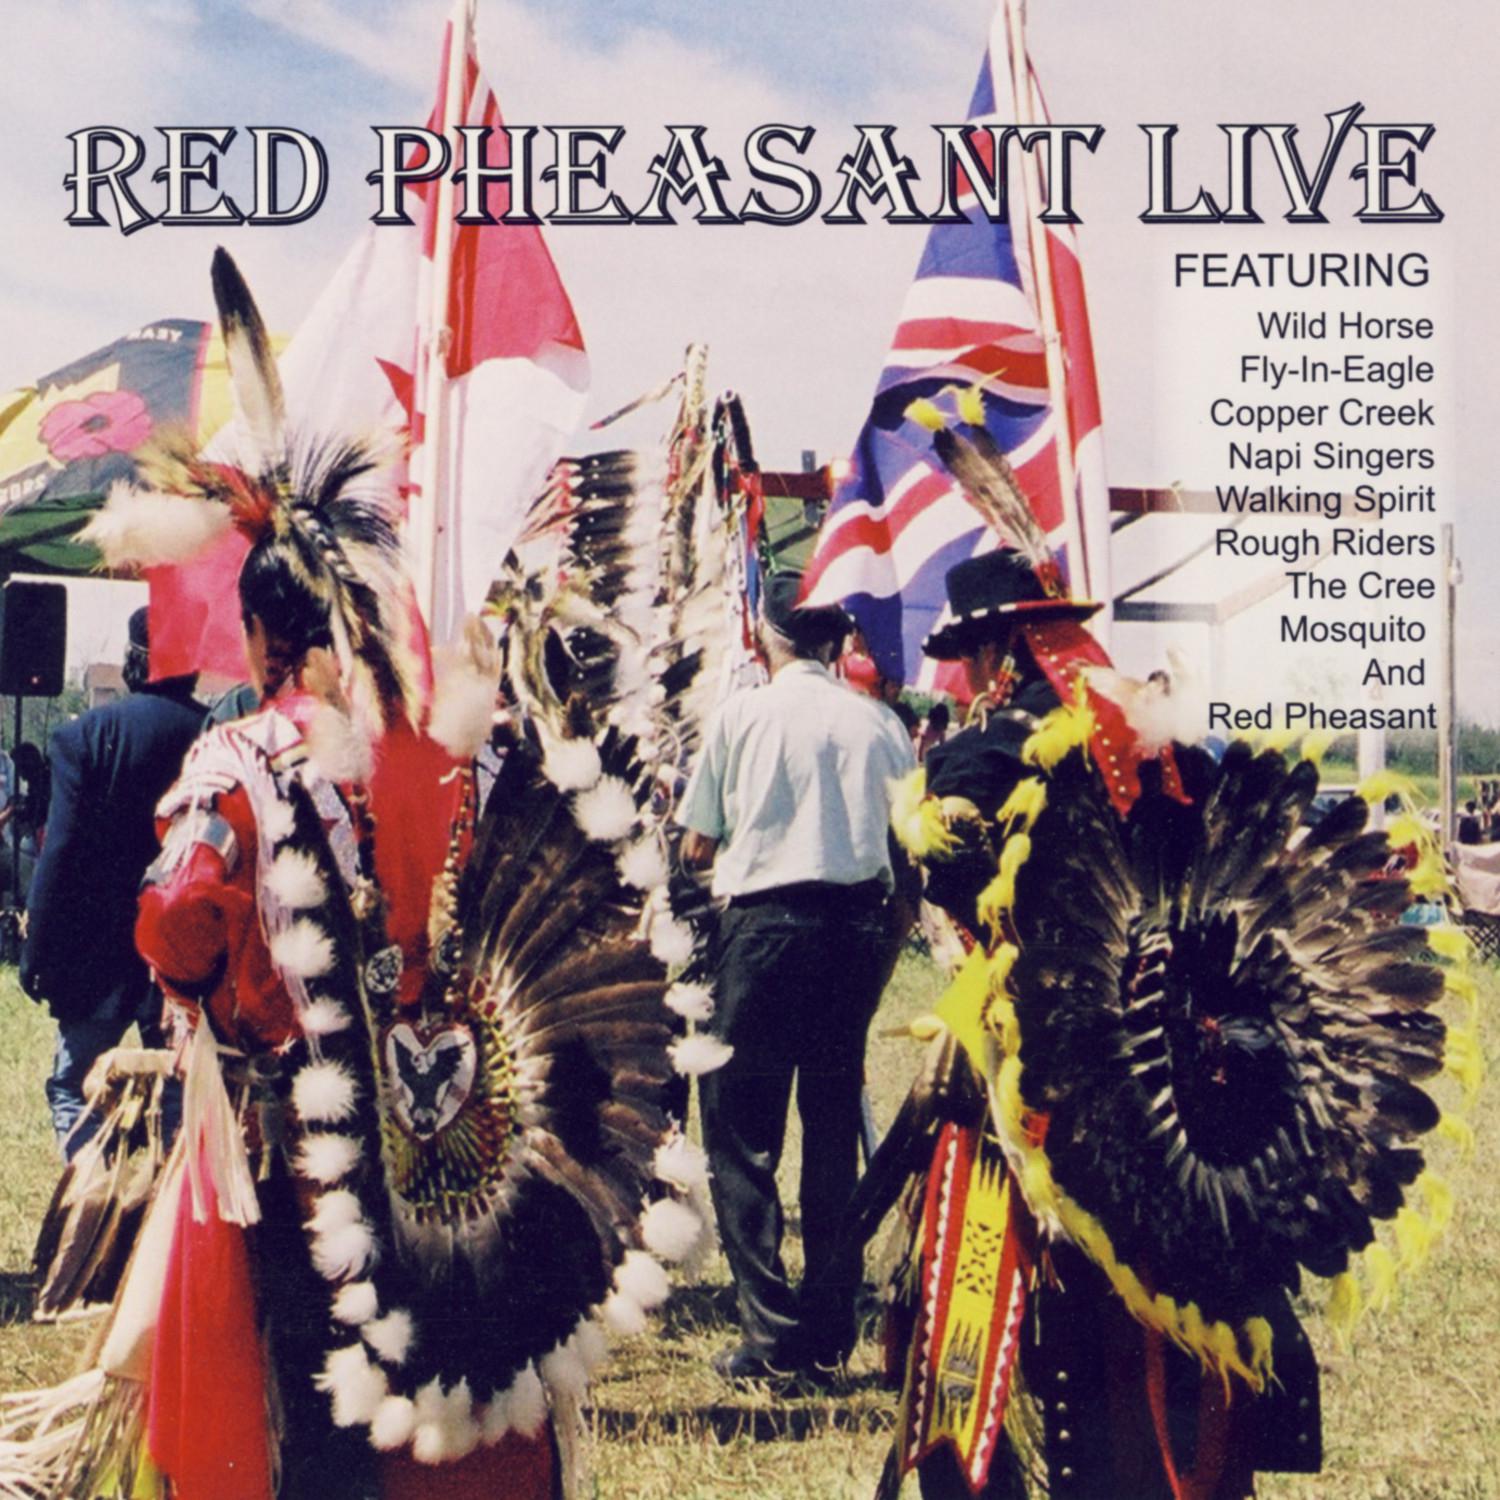 Red Pheasant Live